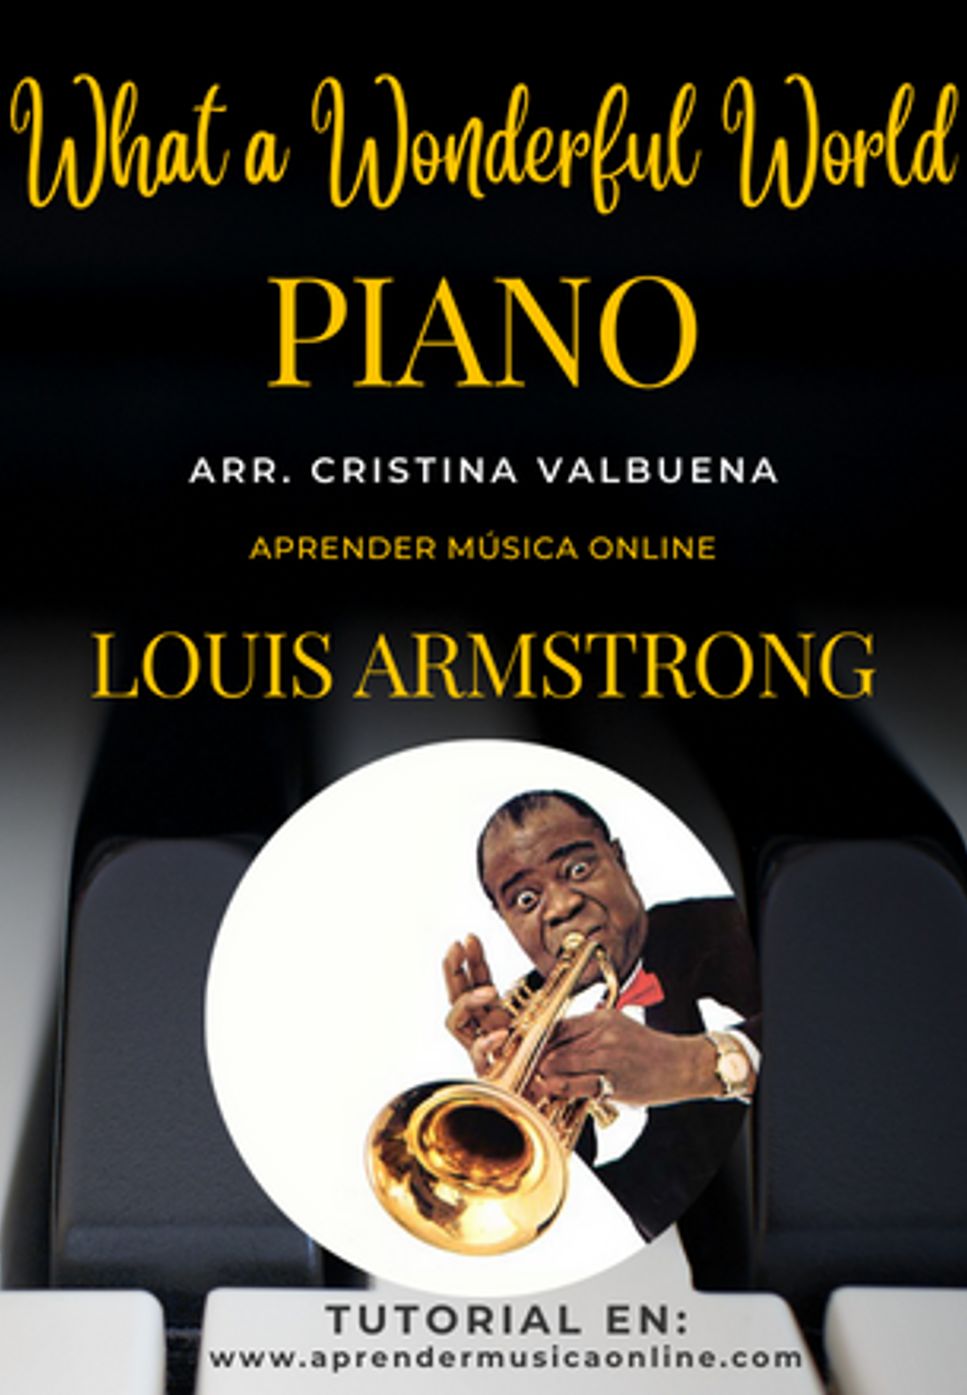 Louis Armstrong - What a Wonderful World by Cristina Valbuena